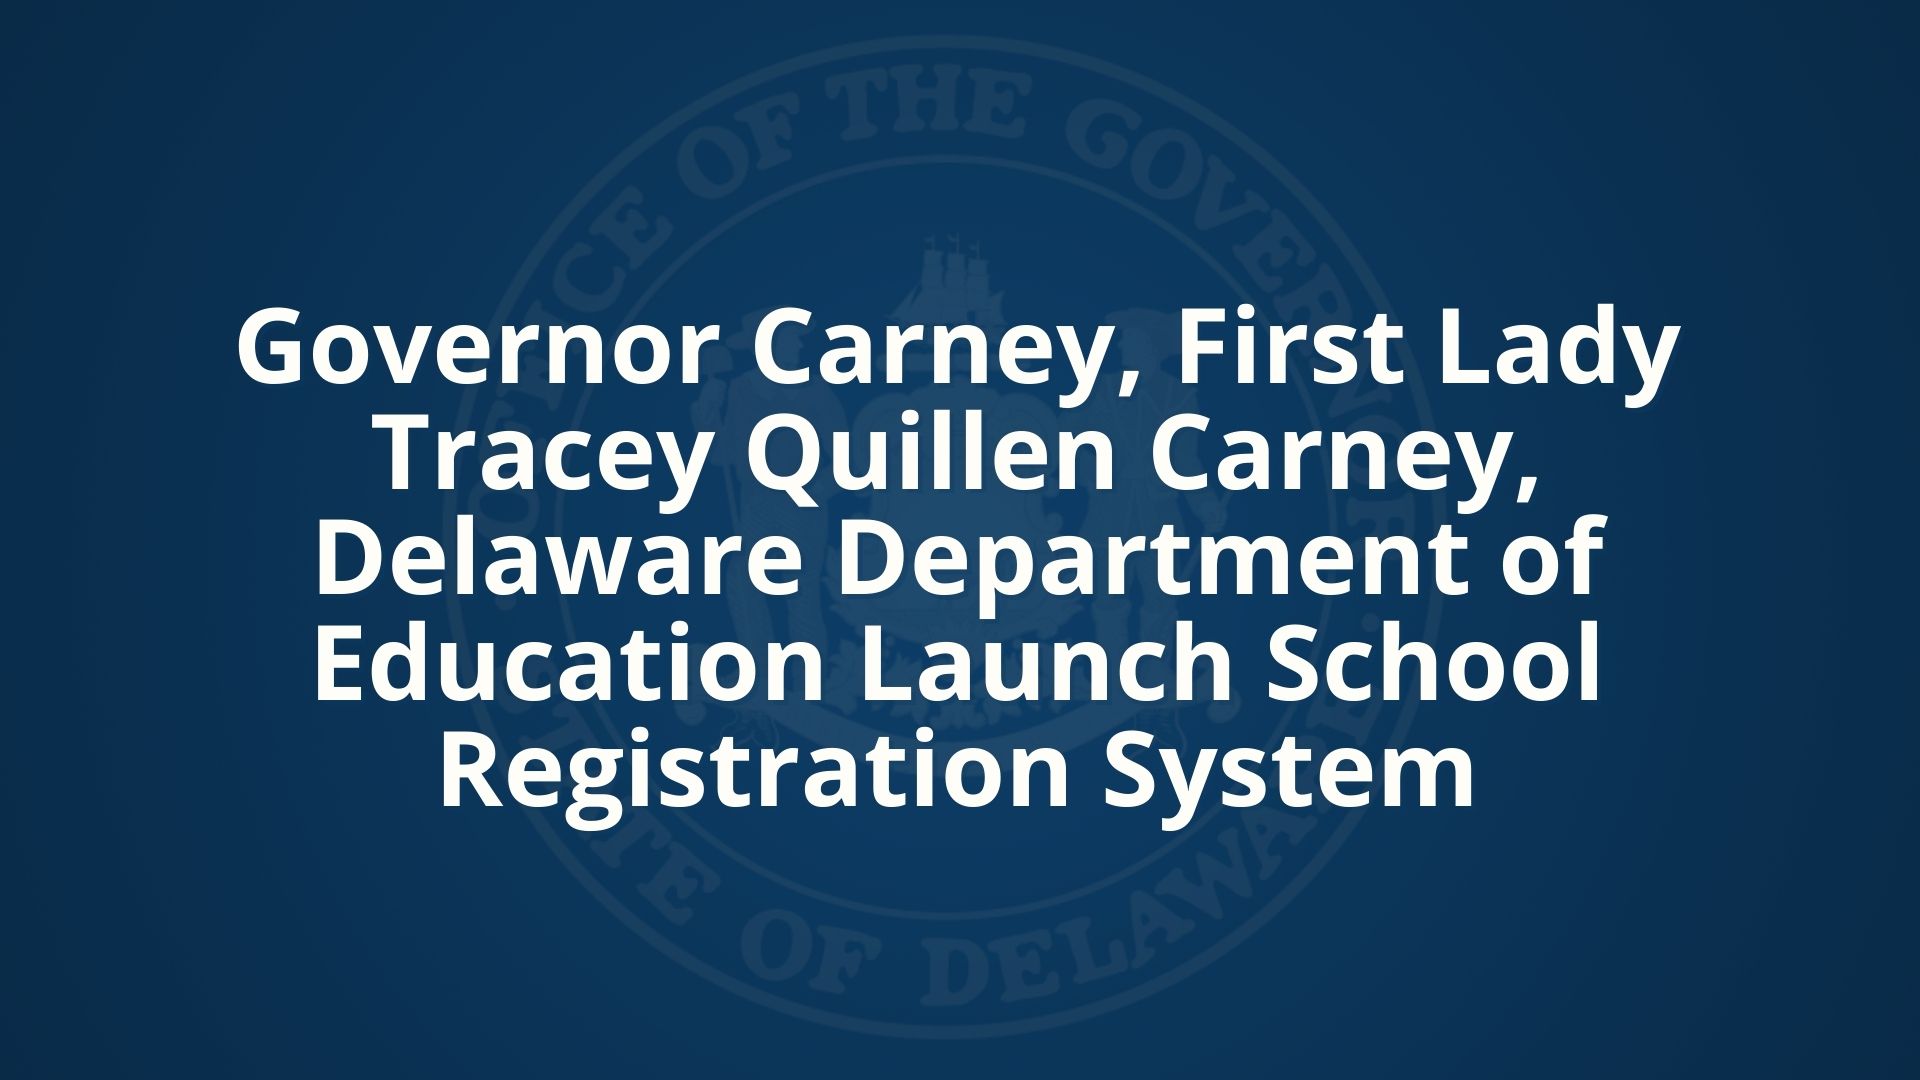 Governor Carney, First Lady Tracey Quillen Carney, Delaware Department of Education Launch School Registration System